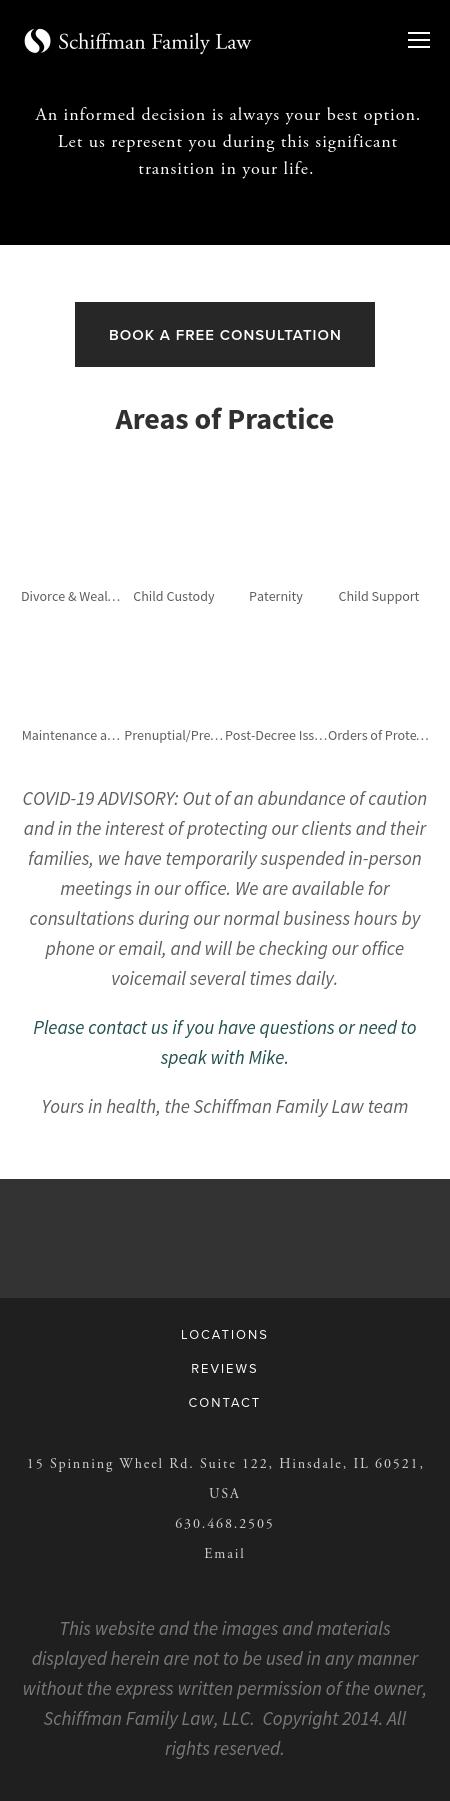 Schiffman Family Law - Hinsdale IL Lawyers